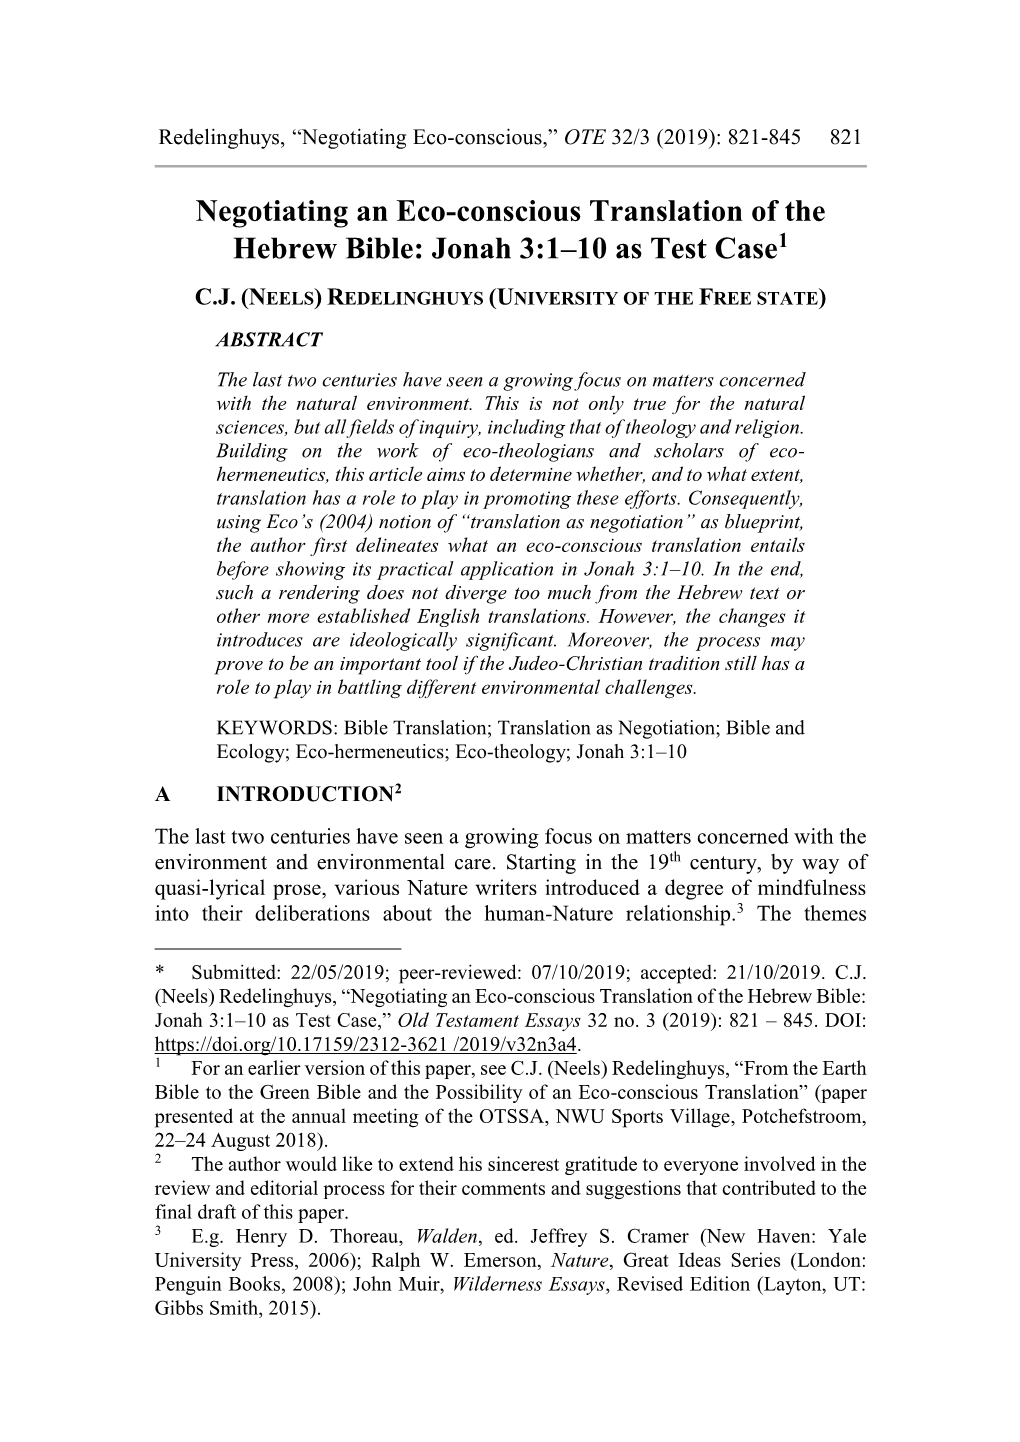 Negotiating an Eco-Conscious Translation of the Hebrew Bible: Jonah 3:1–10 As Test Case1